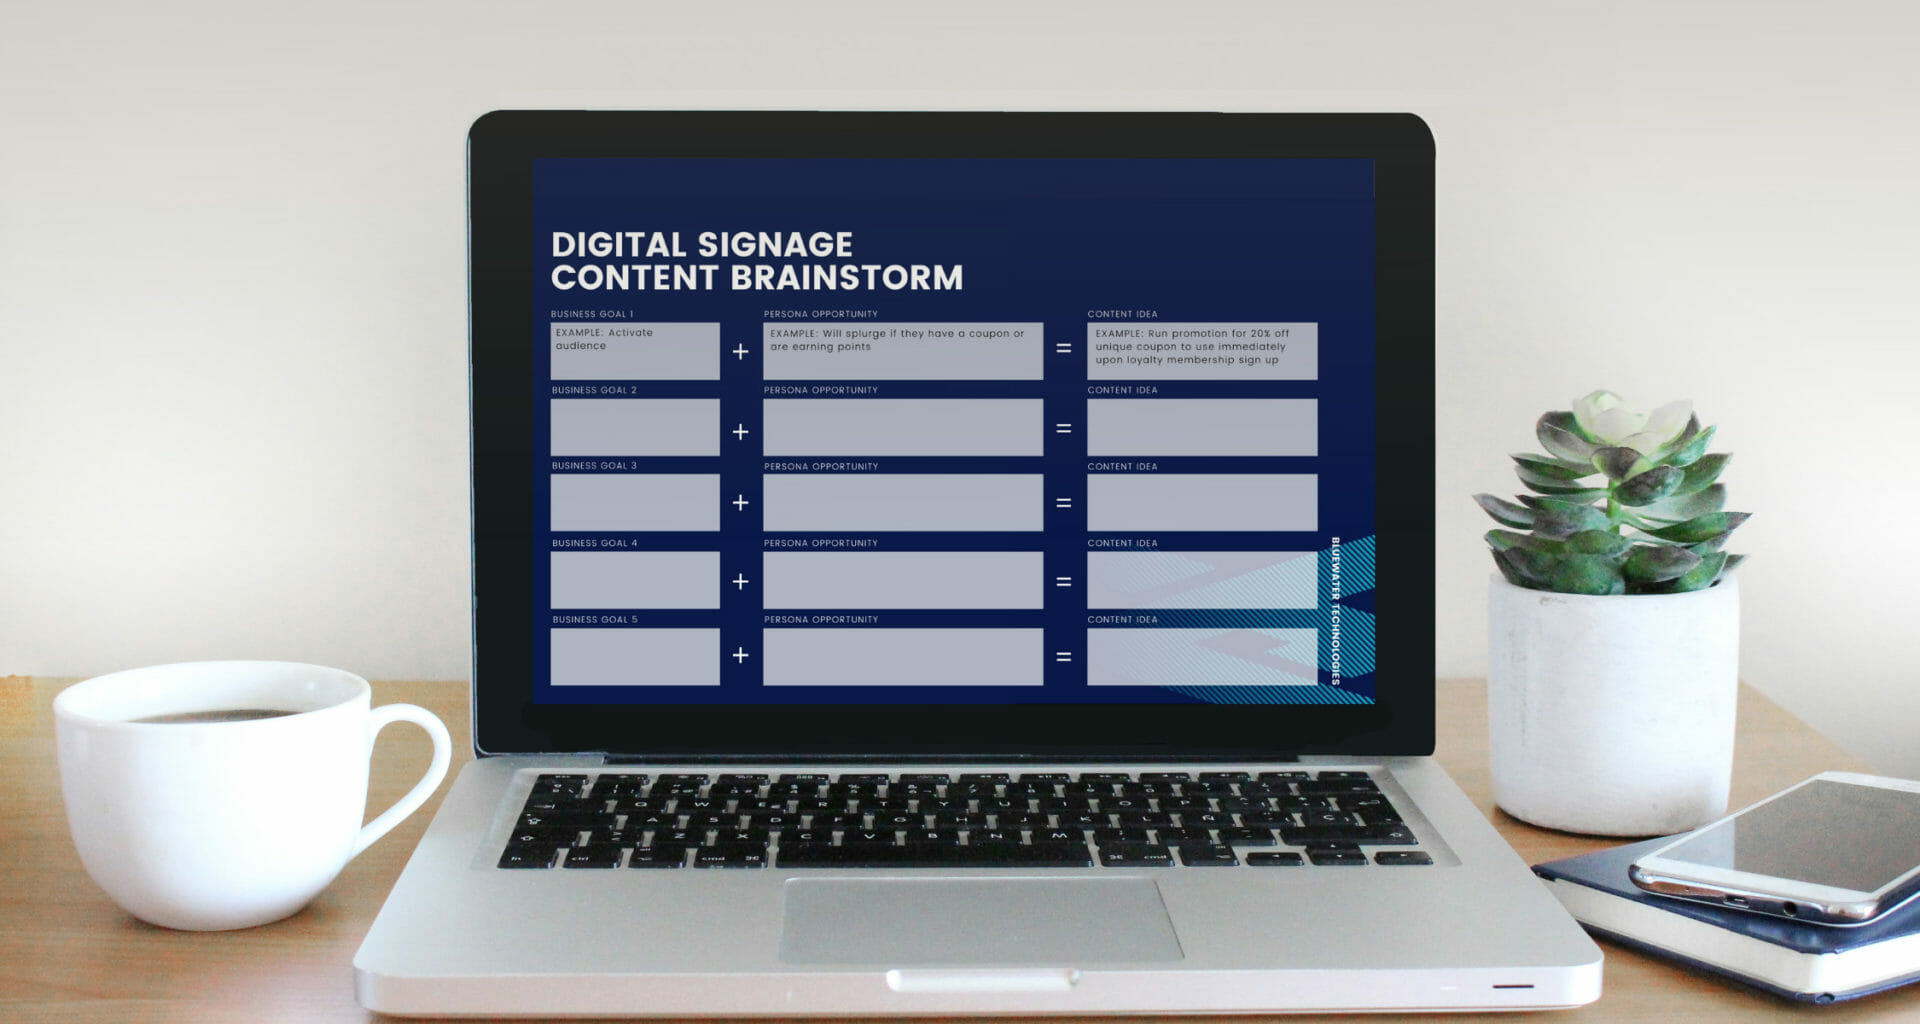 Our 3 Part Framework for Creating A Digital Signage Content Strategy